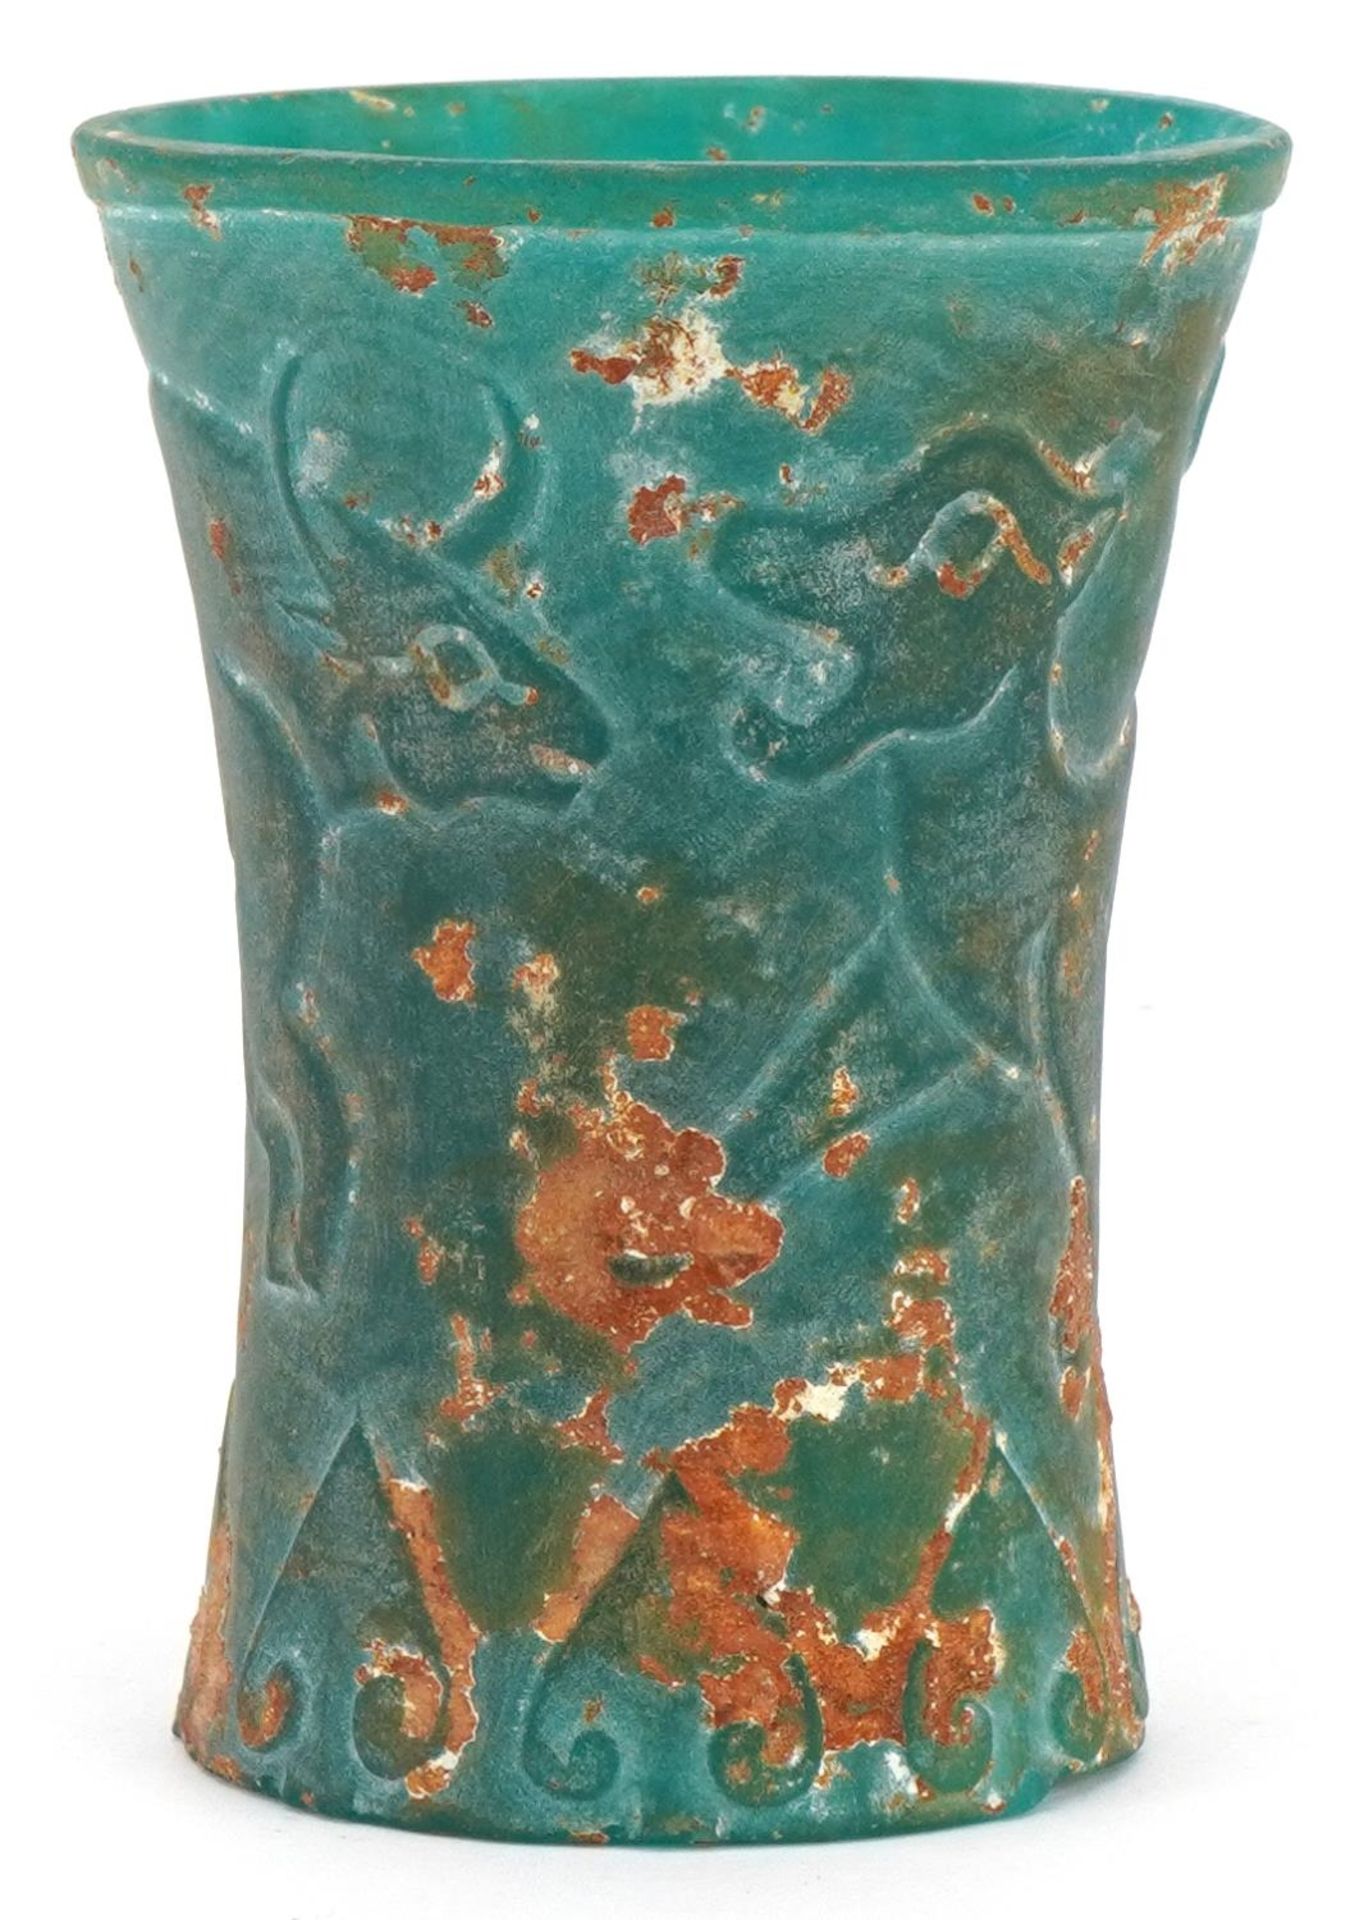 Chinese archaic style turquoise glass beaker decorated with mythical animals, 10.5cm high : For